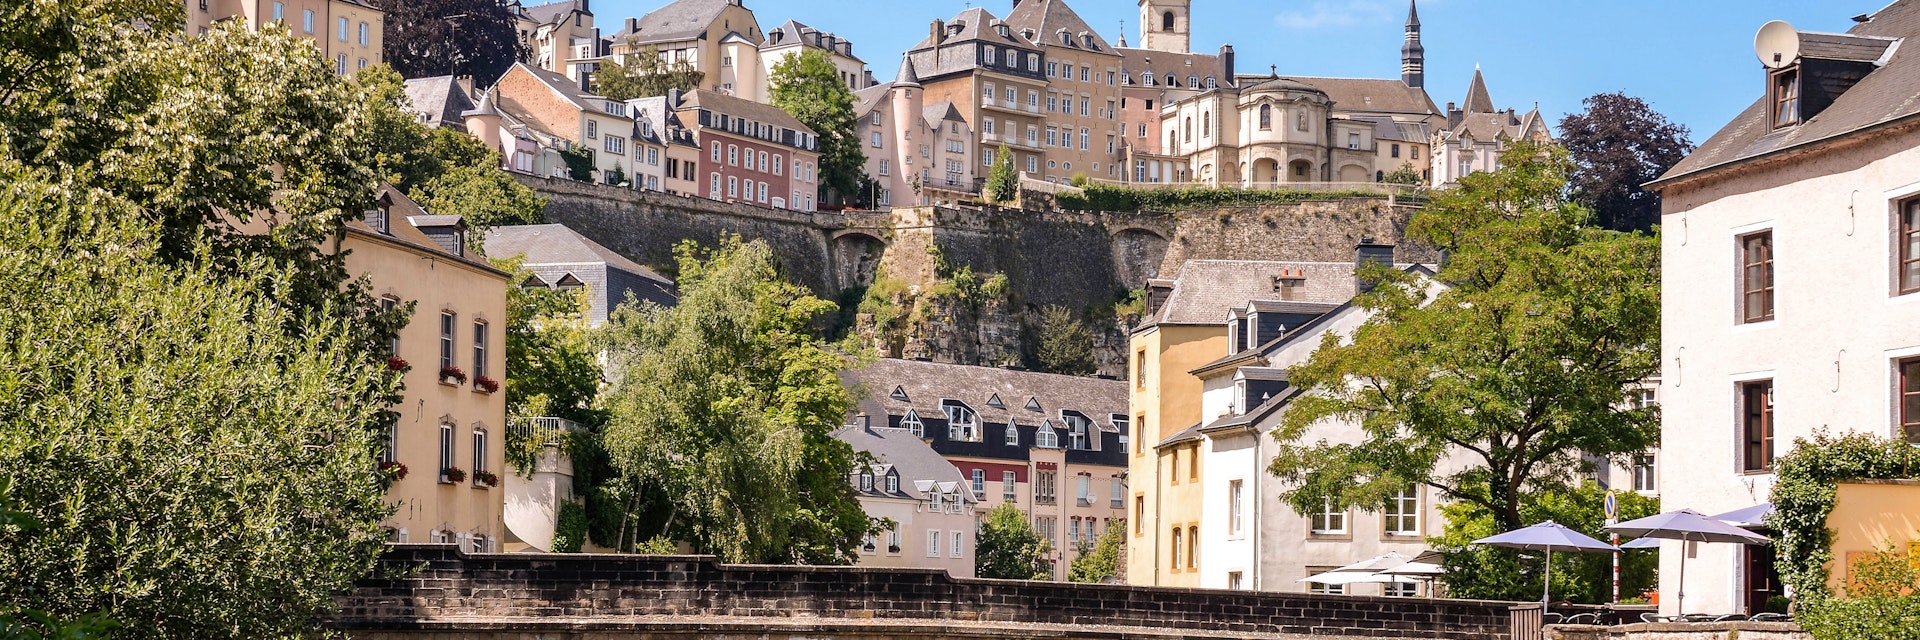 Luxembourg City, historic destrict Grund, bridge over Alzette river
183909539
Capital Cities, Travel, Tourism, Scenics, History, Journey, Tranquil Scene, Green, Blue, Old, Architecture, Urban Scene, Outdoors, Luxembourg, Europe, Tree, Reflection, Sky, River, Water, Dome, Roof, Wall, House, Castle, Bridge, Fort, Tower, Built Structure, Cityscape, City, Alzette, grund